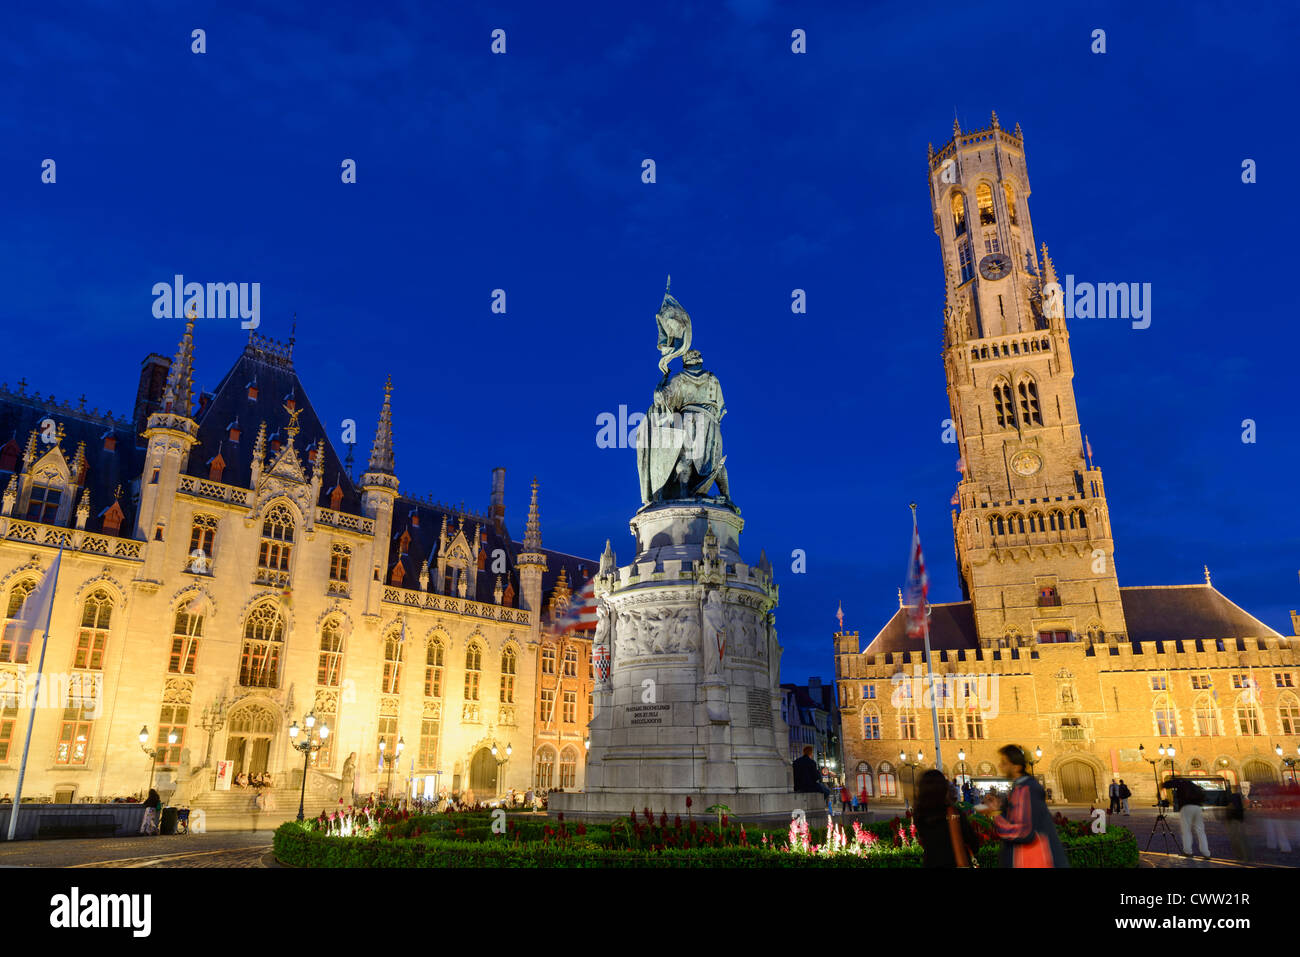 Statue of Jan Breydel and Pieter de Coninck with Belfry and Provincial Government Palace,Market Square, Bruges,Belgium Stock Photo